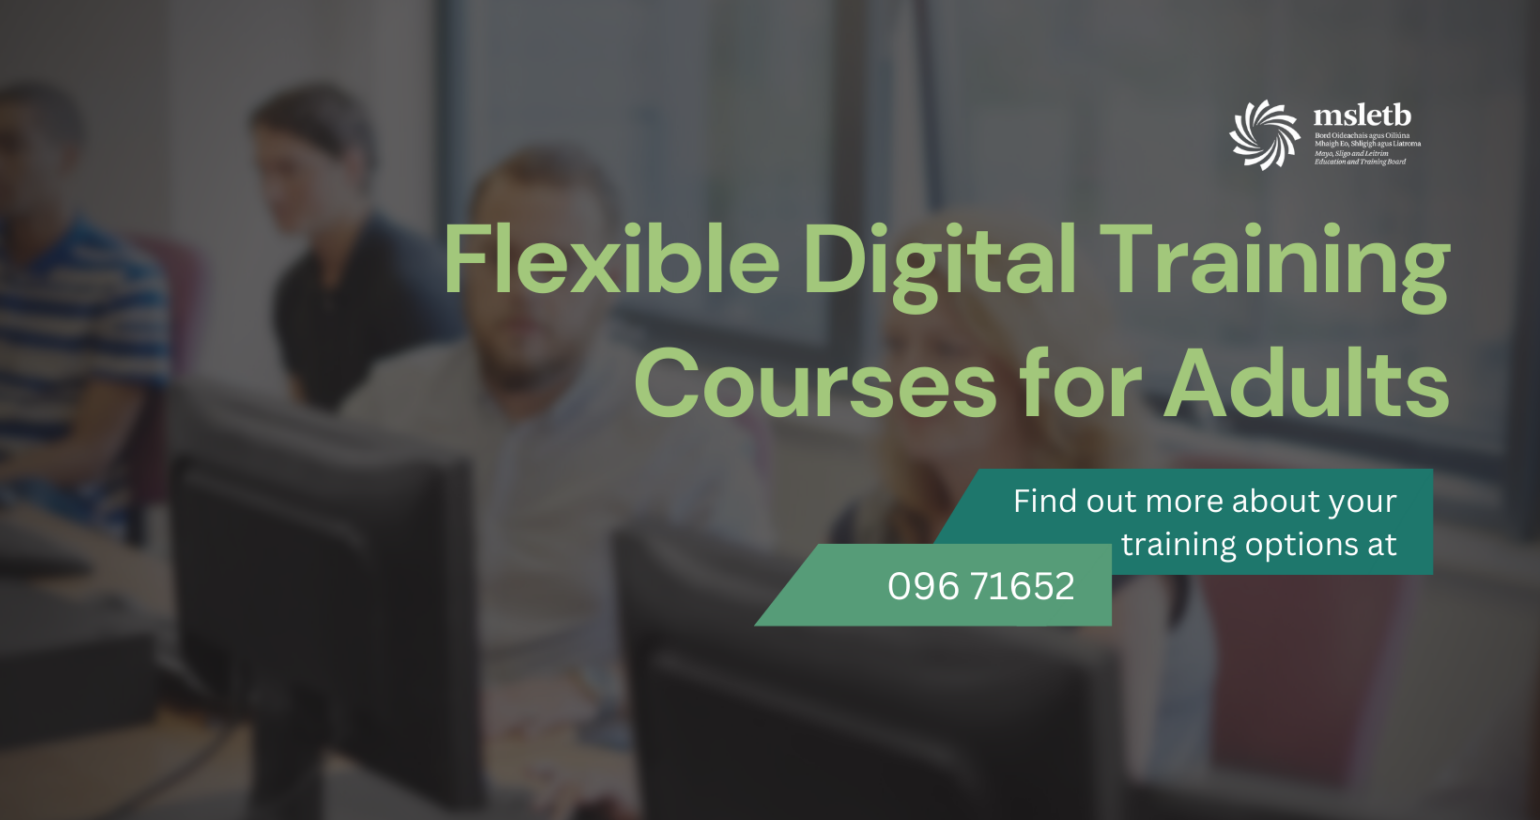 The MSLETB Now Offering Digital Skills Assessment and Flexible Computer Courses for Adult Learners in Ballina.